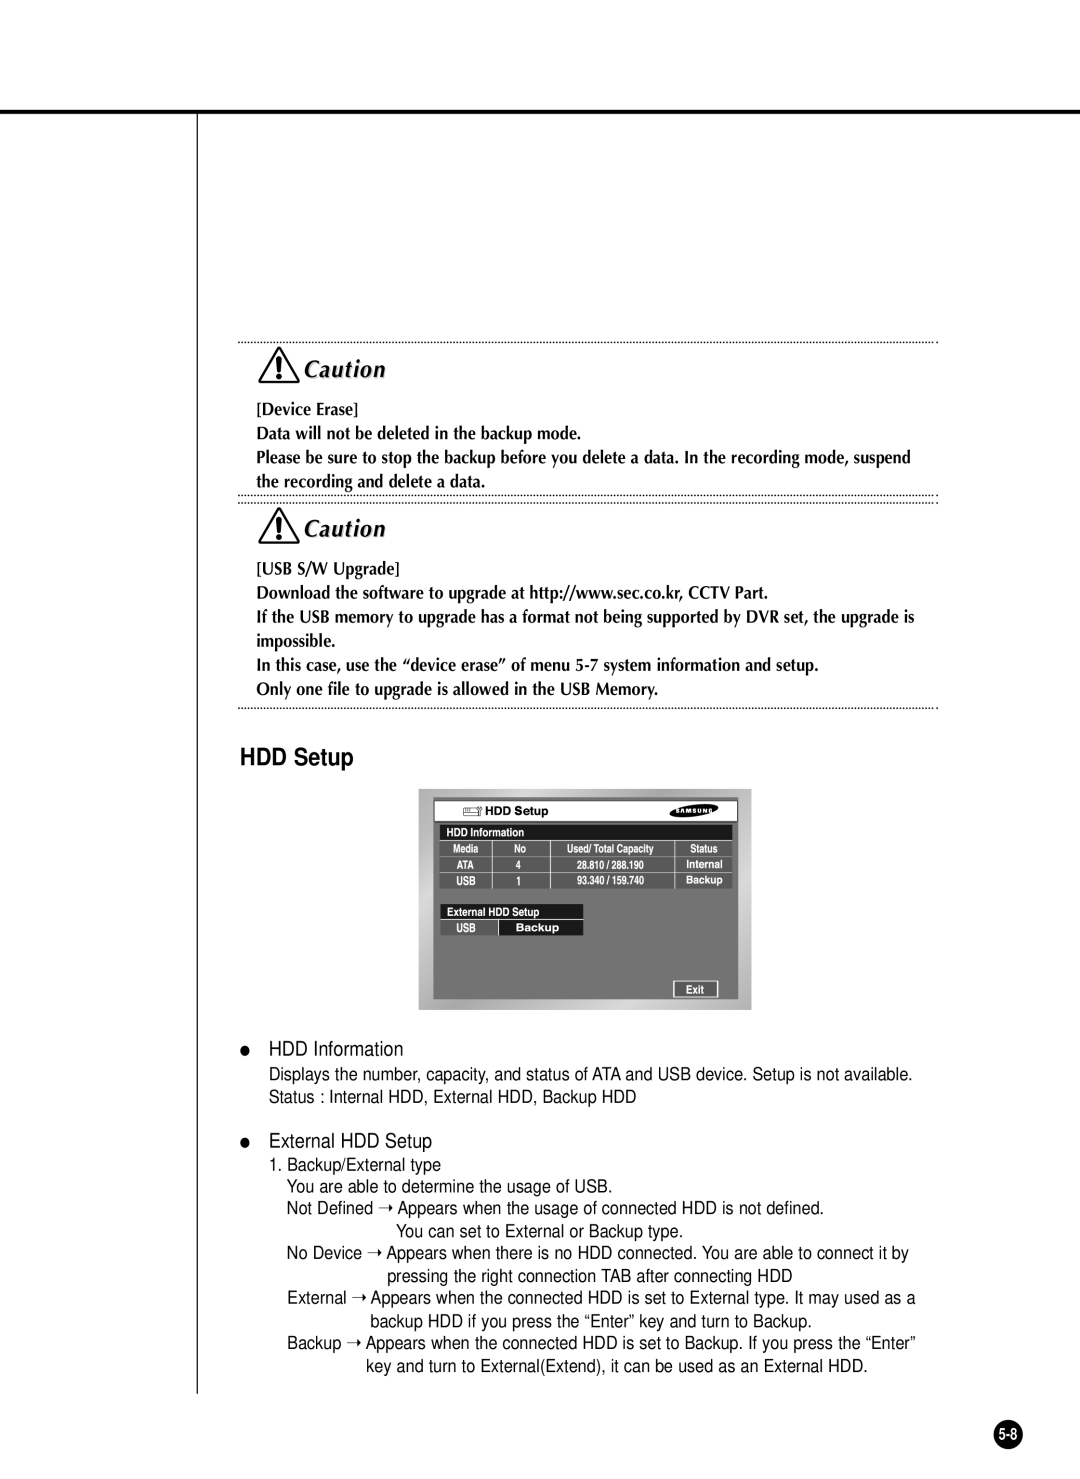 Samsung SHR-2040P manual HDD Information, External HDD Setup, Device Erase Data will not be deleted in the backup mode 